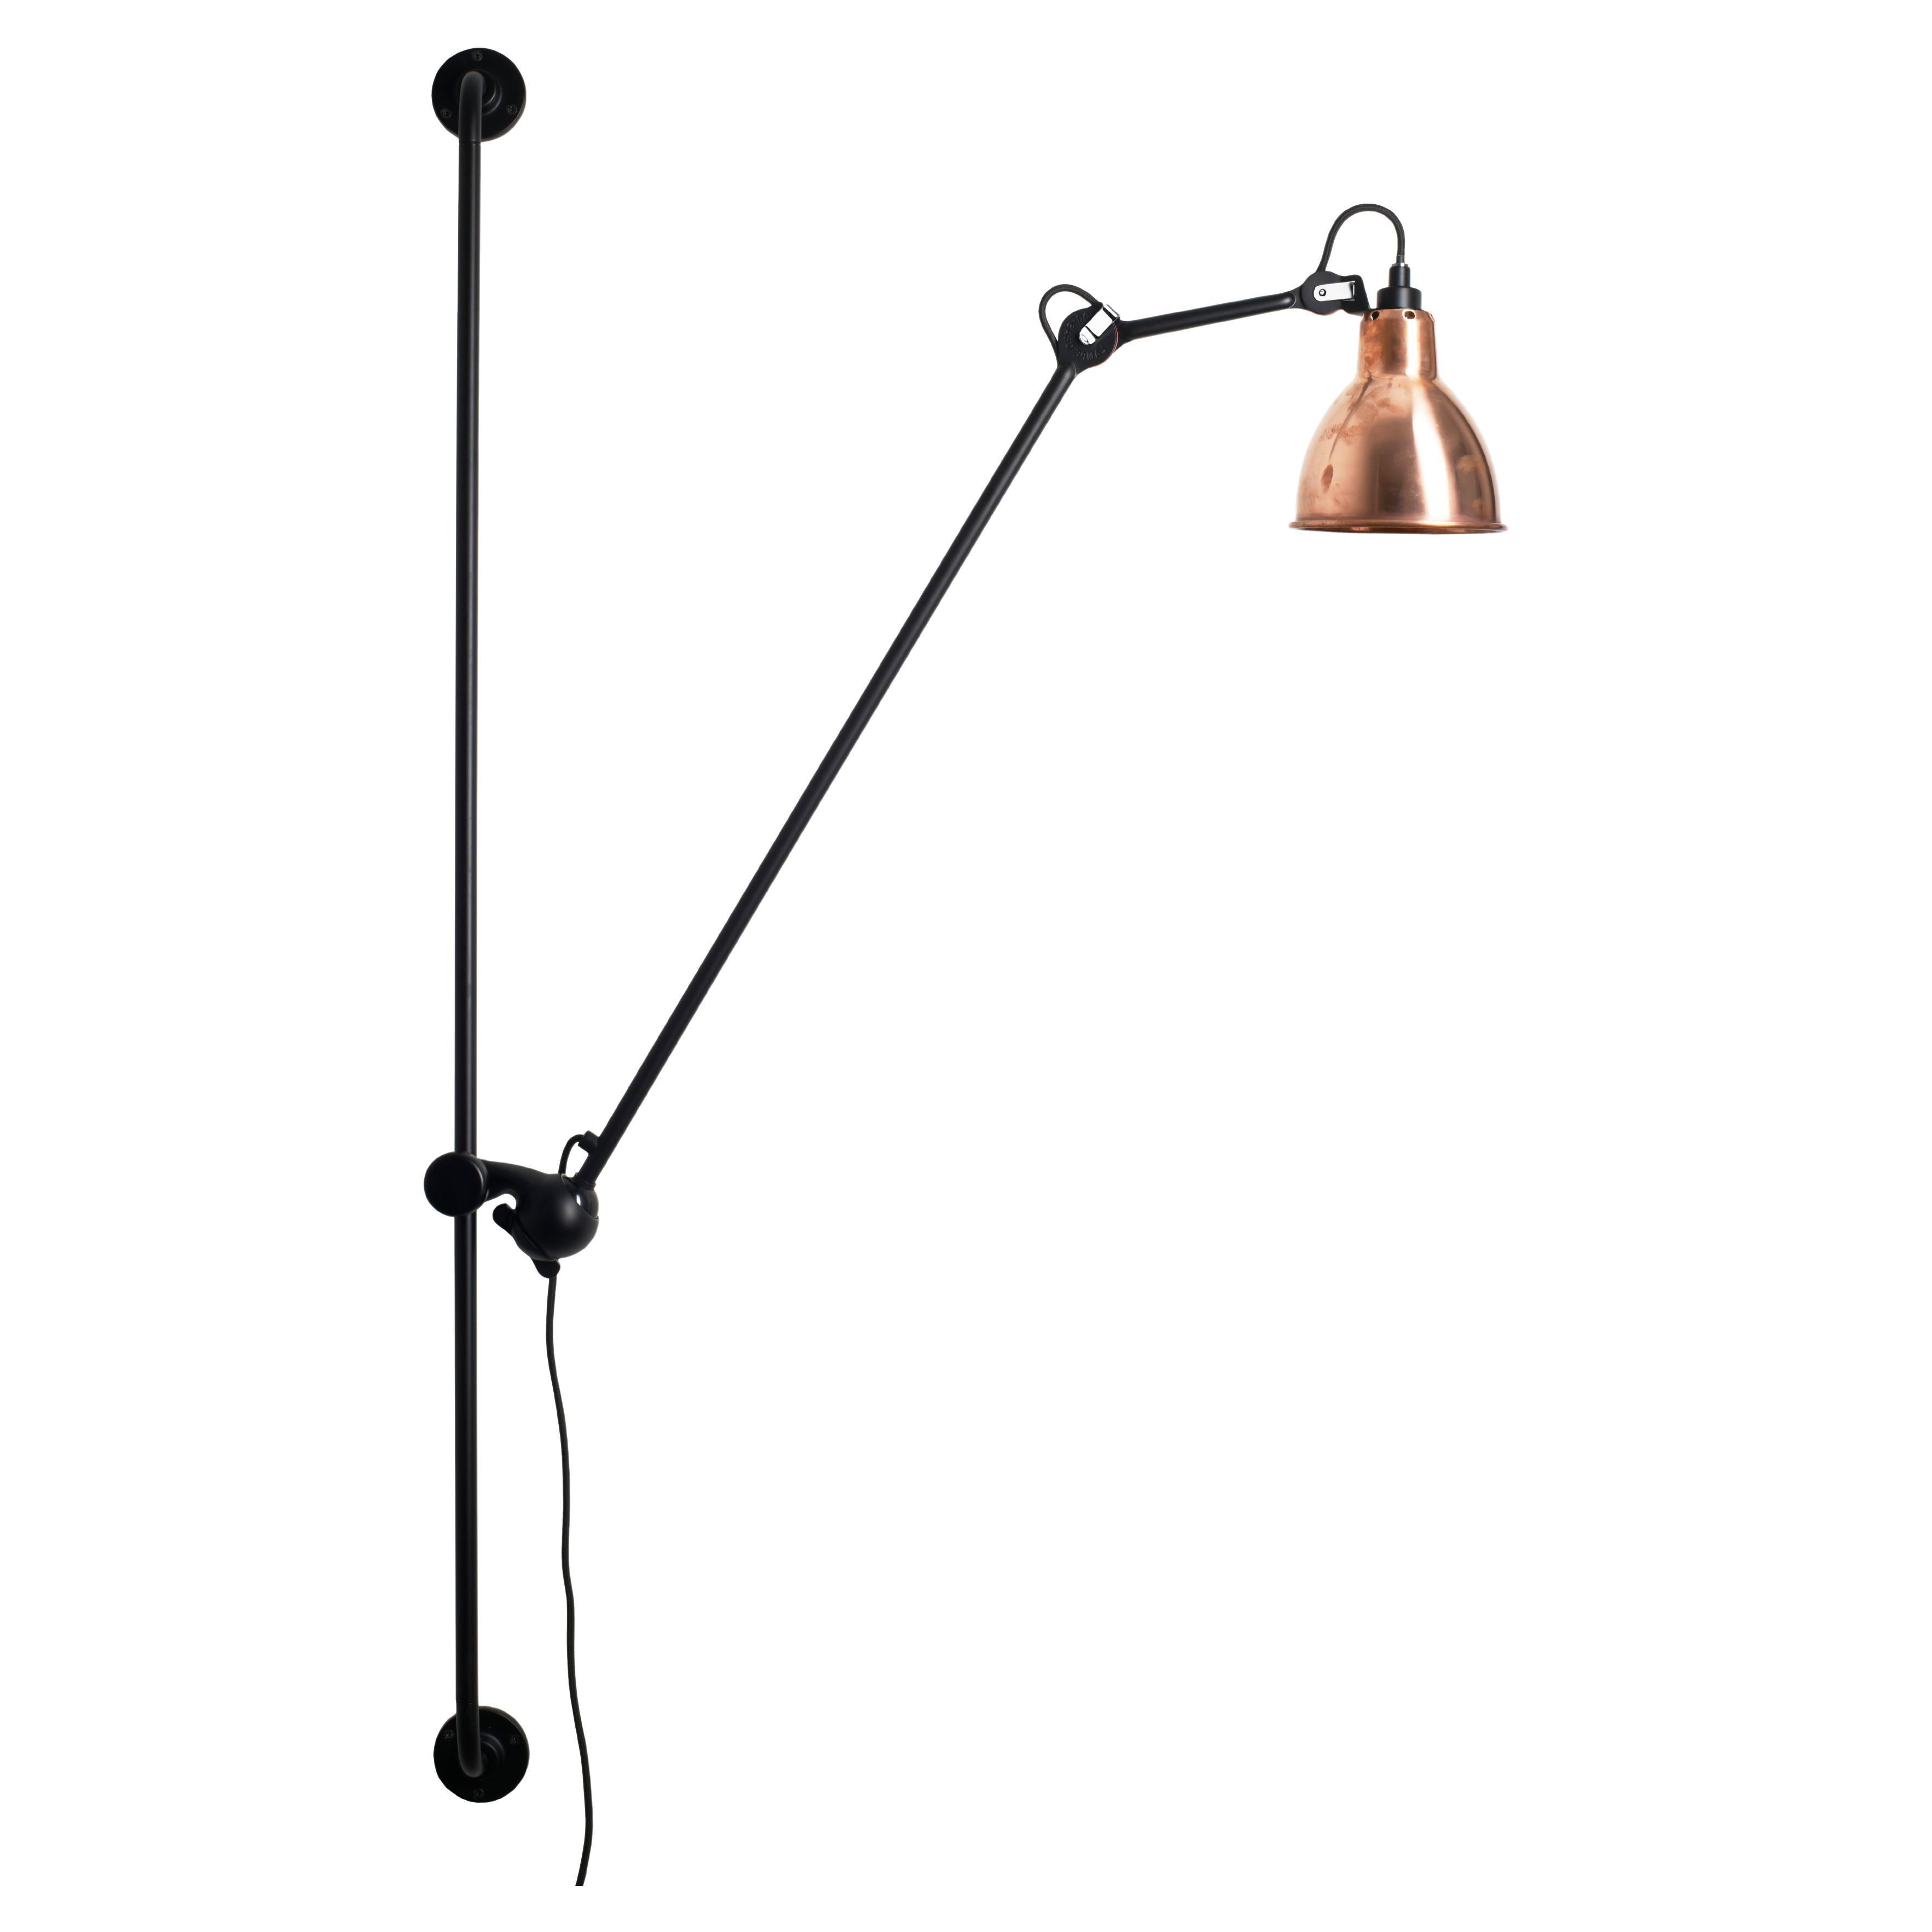 DCW Editions La Lampe Gras N°214 Round Wall Lamp in Black Arm & Raw Copper Shade